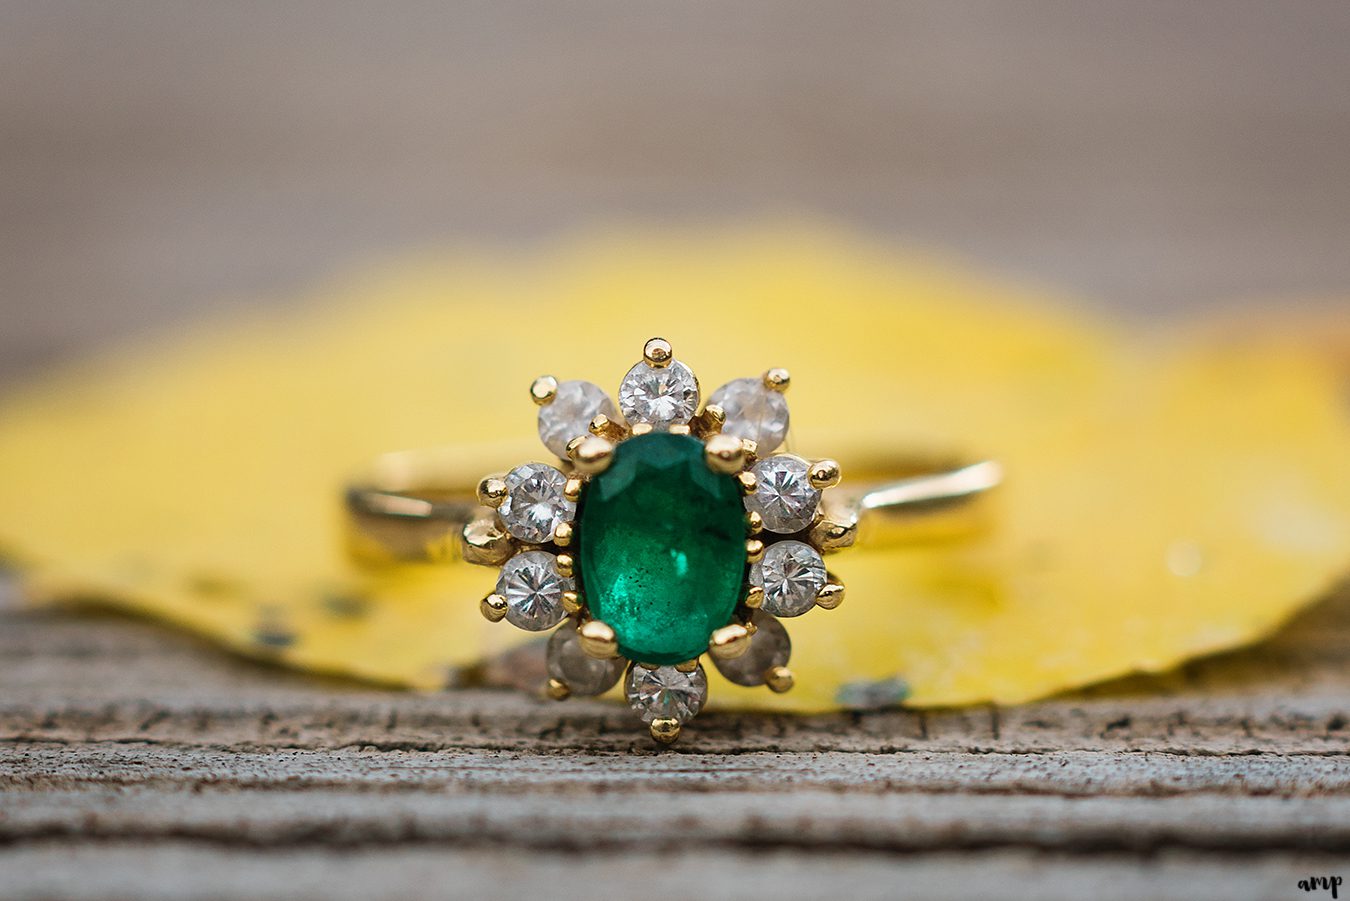 Emerald and diamond engagement ring on an aspen leaf